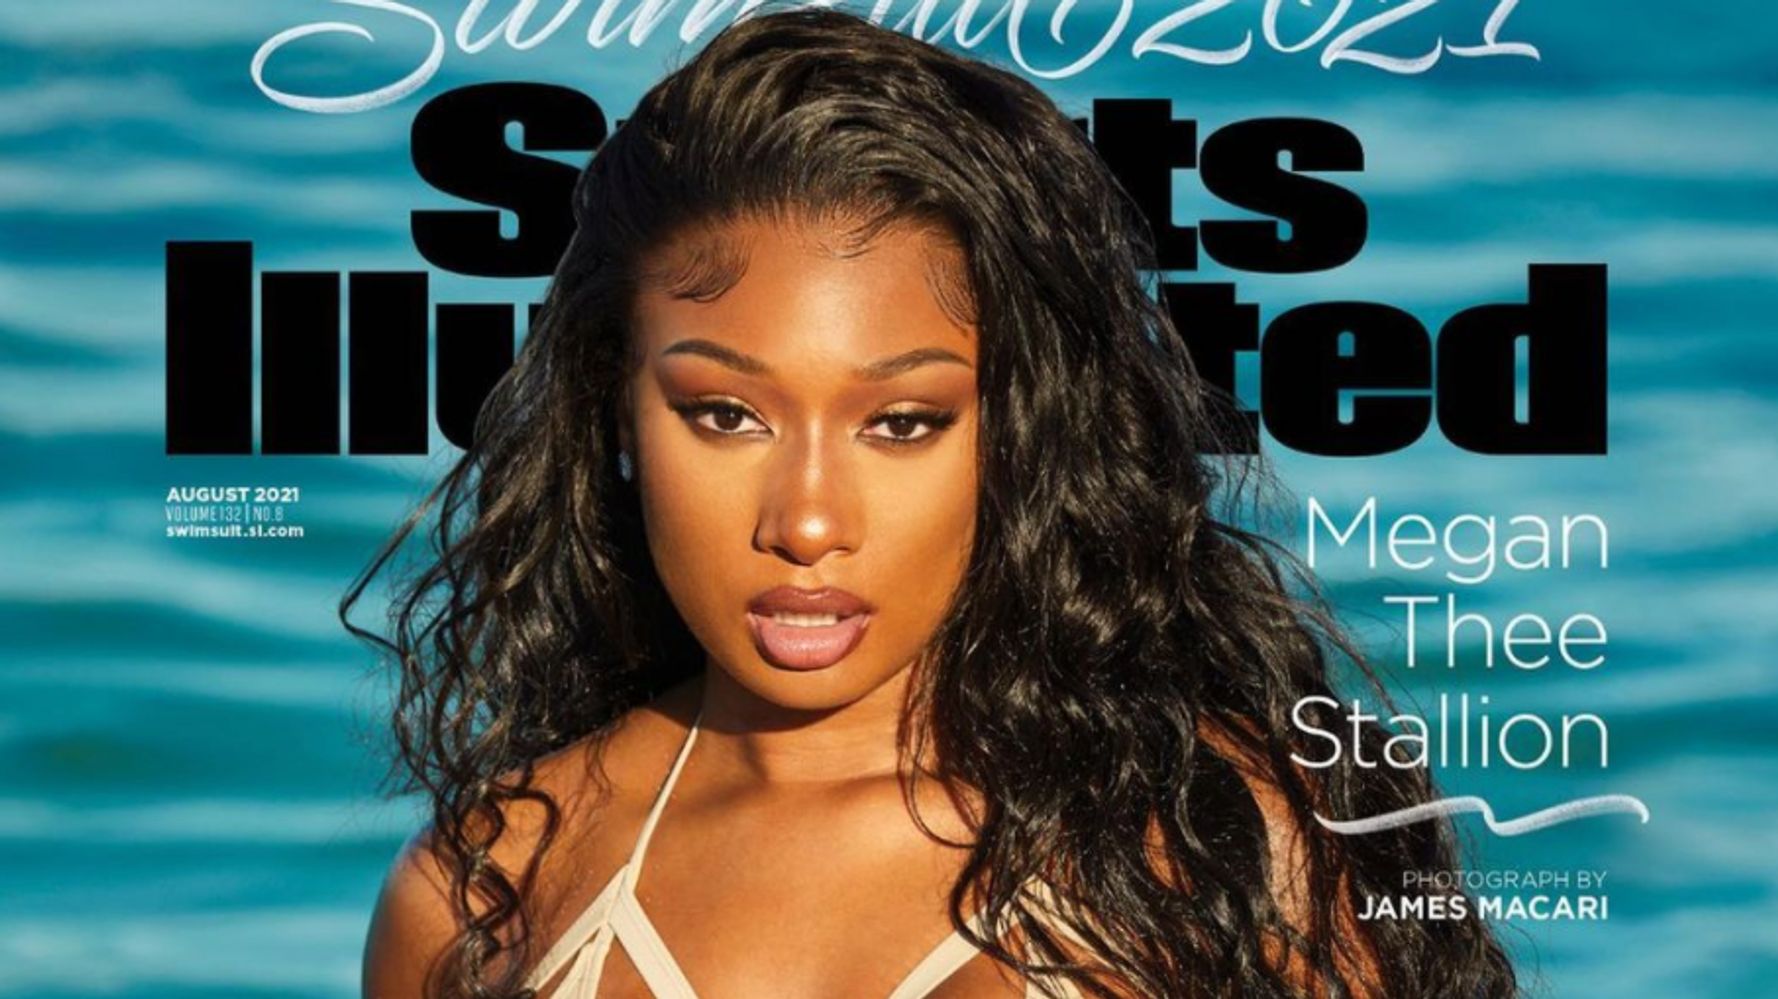 Megan Thee Stallion Becomes 1st Female Rapper On Sports Illustrated Cover, Fans Rave